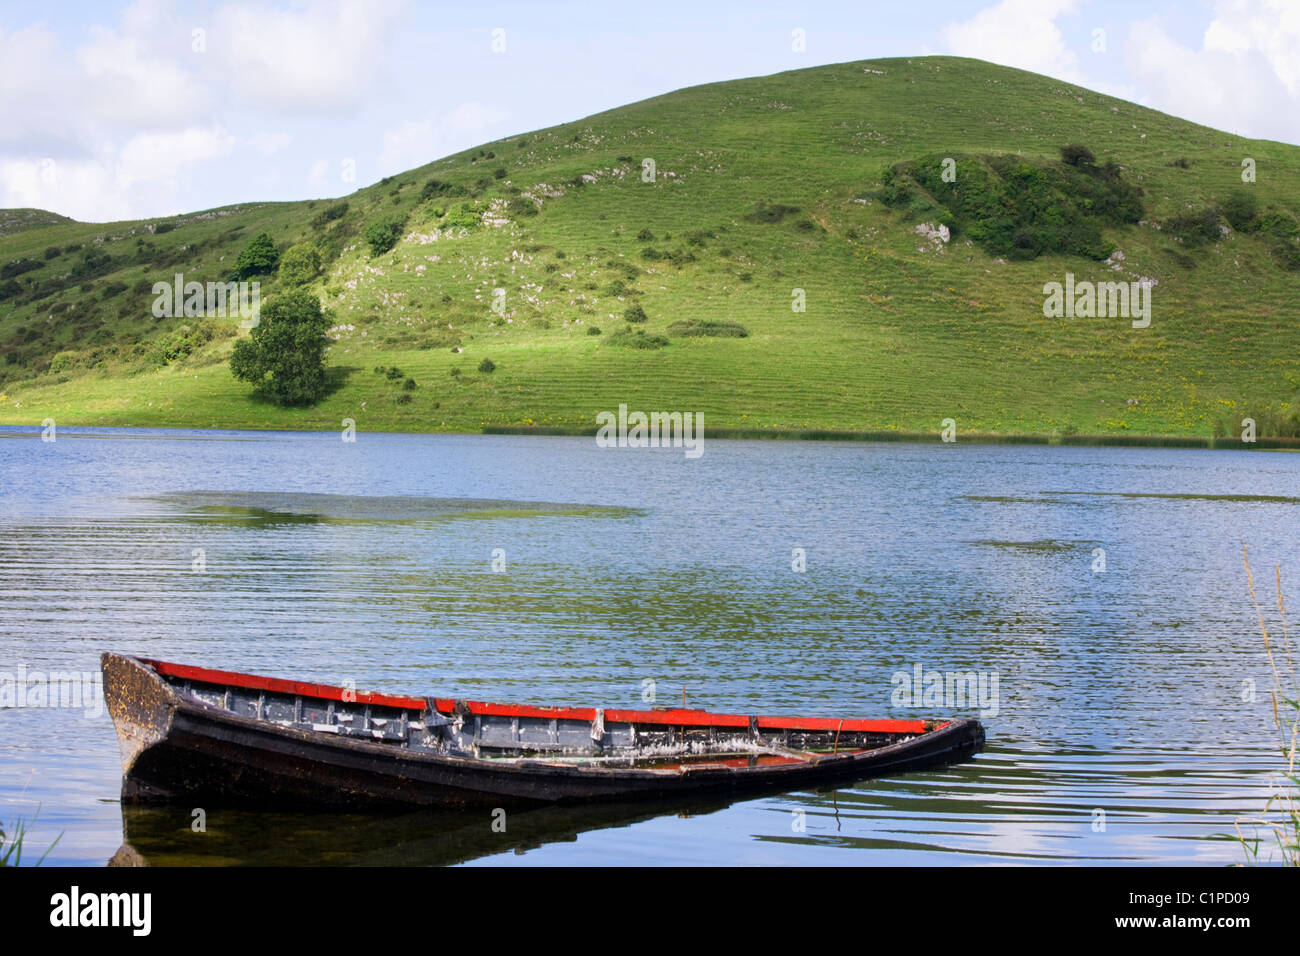 Republic of Ireland, County Limerick, sinking rowing boat on Lough Gur Stock Photo